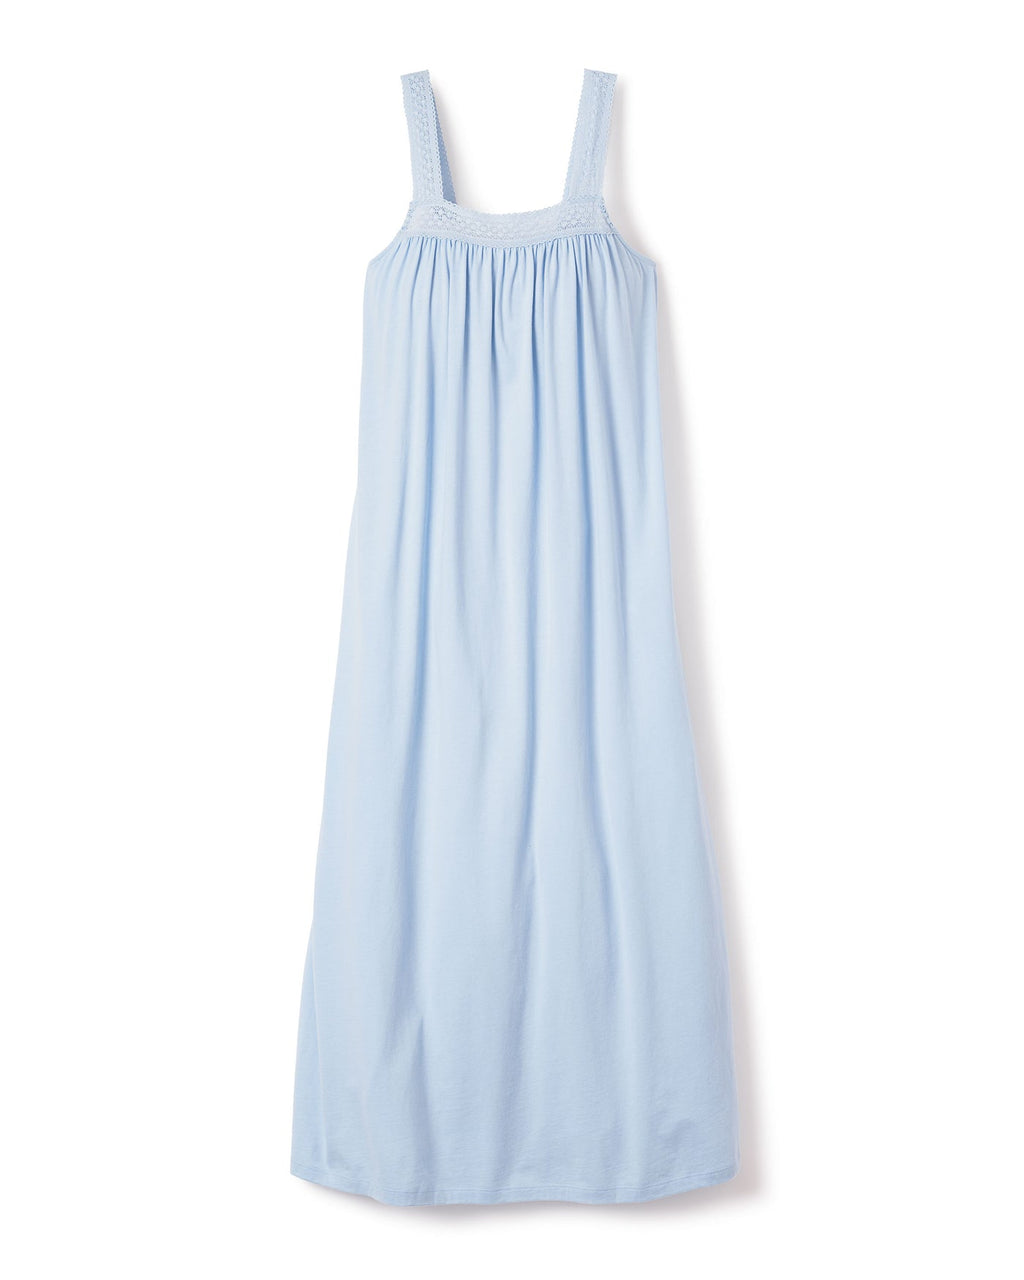 Petite Plume Luxe Pima Camille Nightgown in Periwinkle